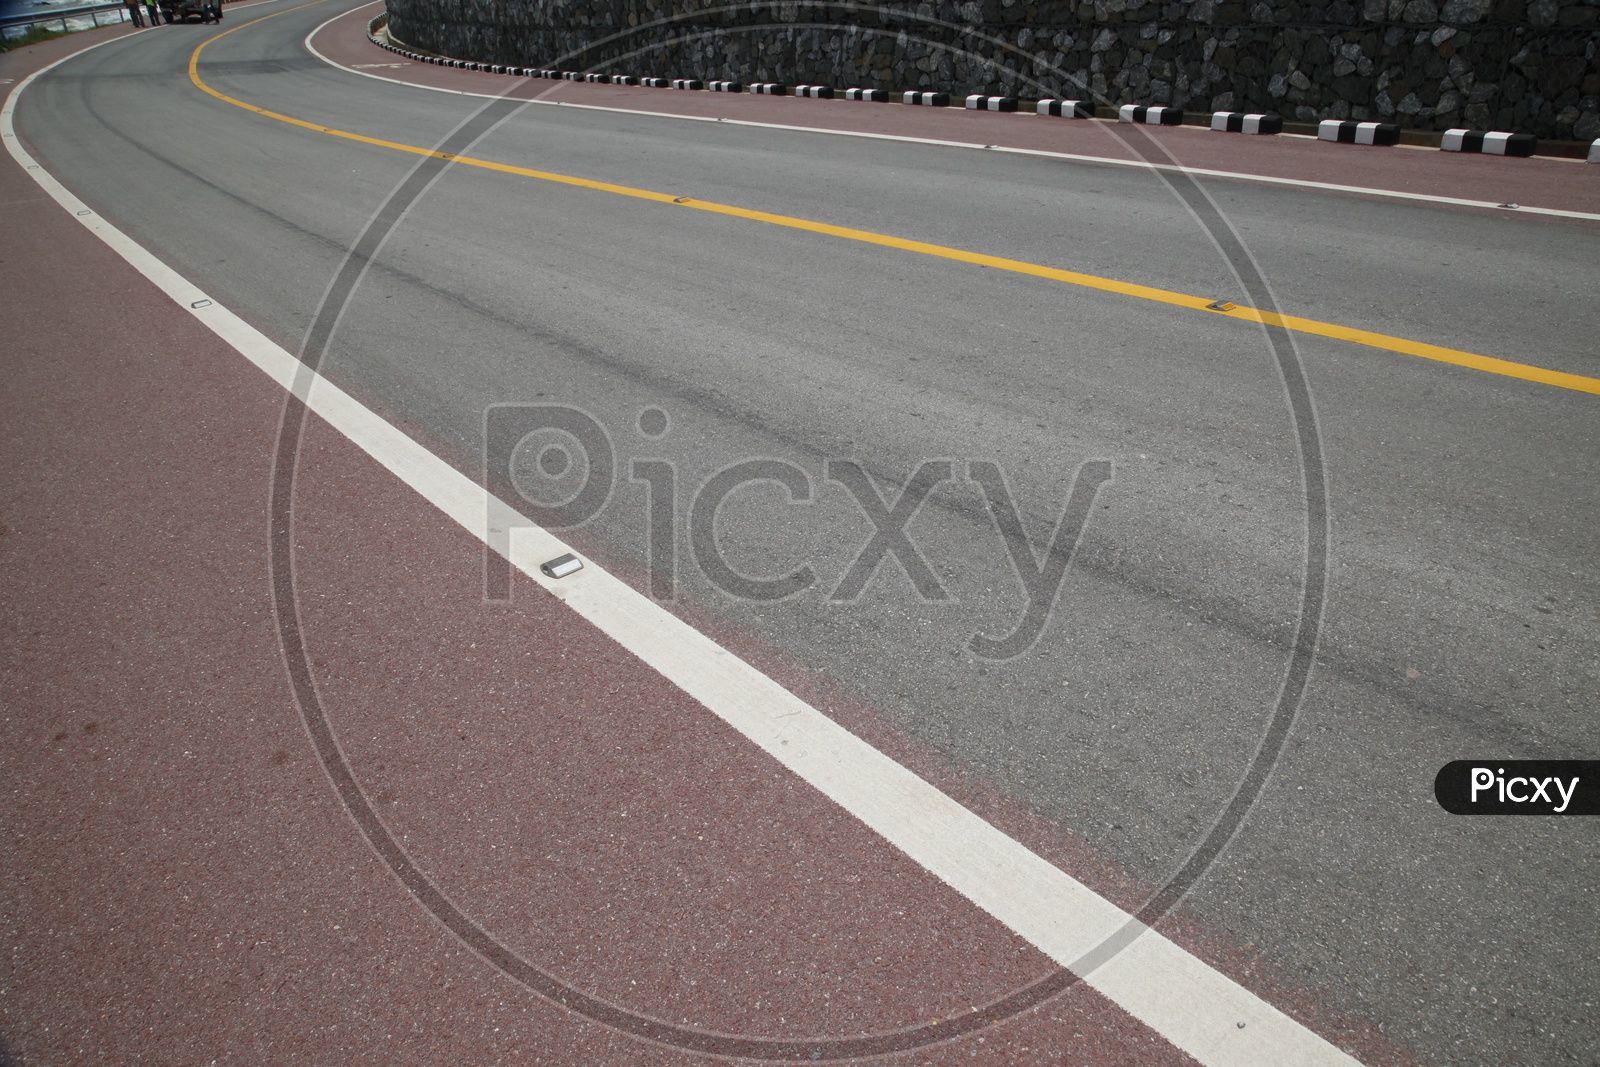 Road surface markings and pavement markers